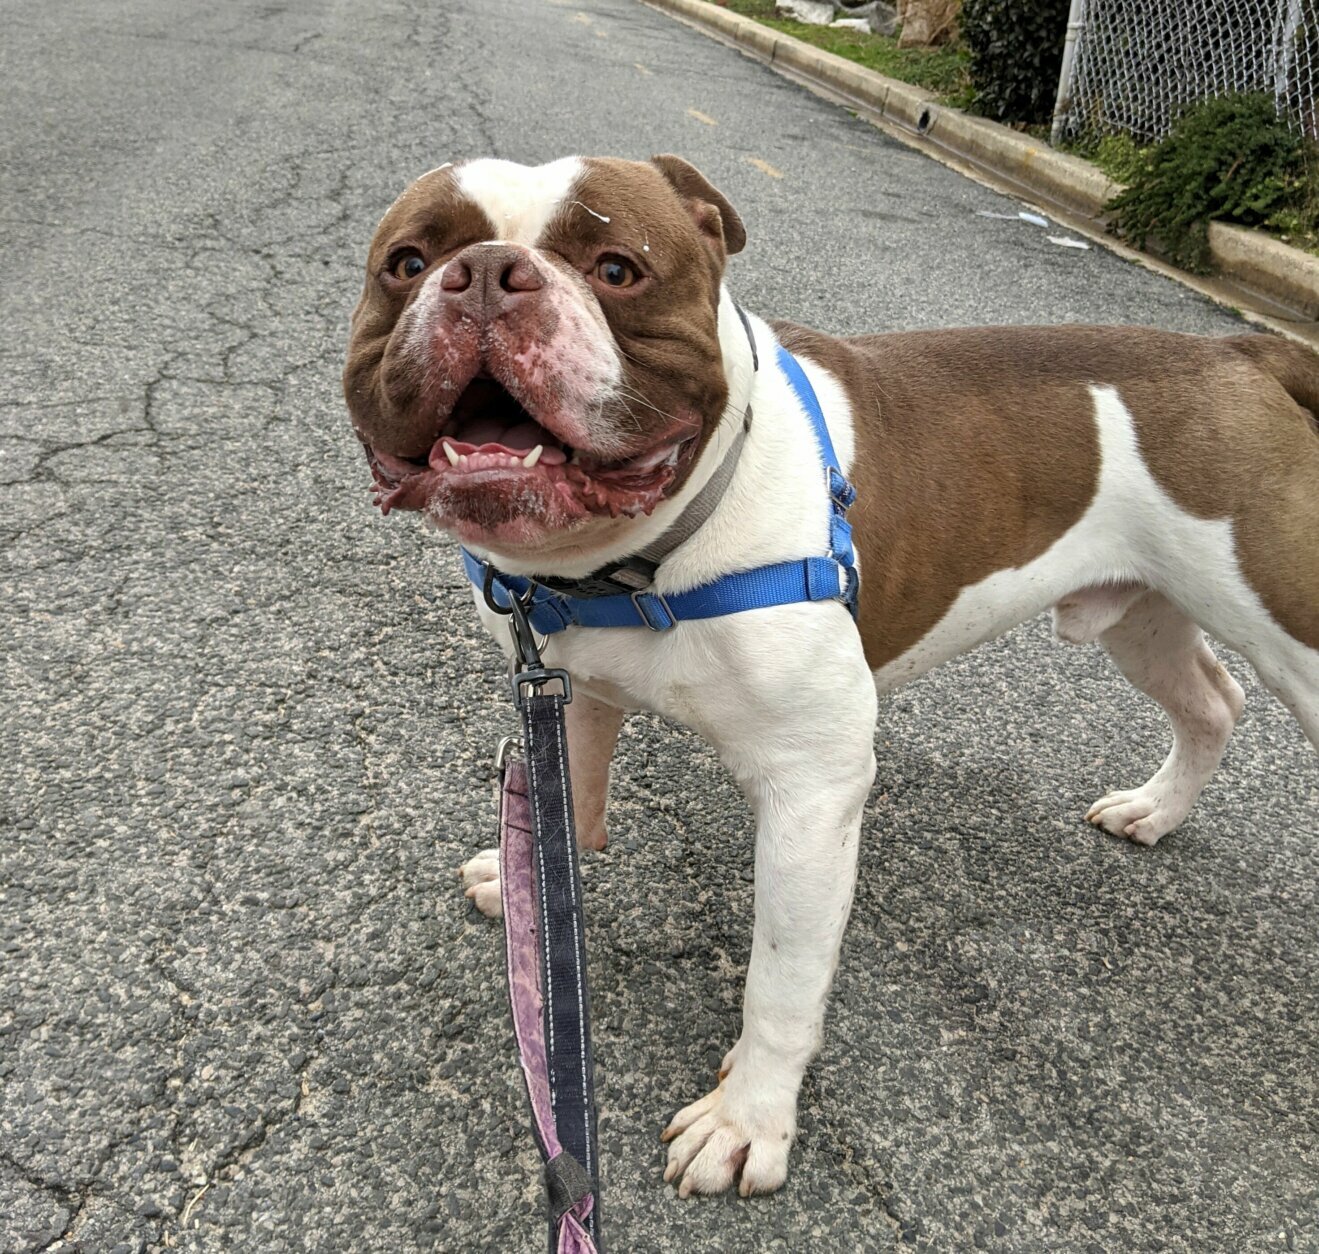 <p><strong>Jean Claude</strong> was adopted, and now the high-energy, happy sweetheart is living his best life in West Virginia.</p>
